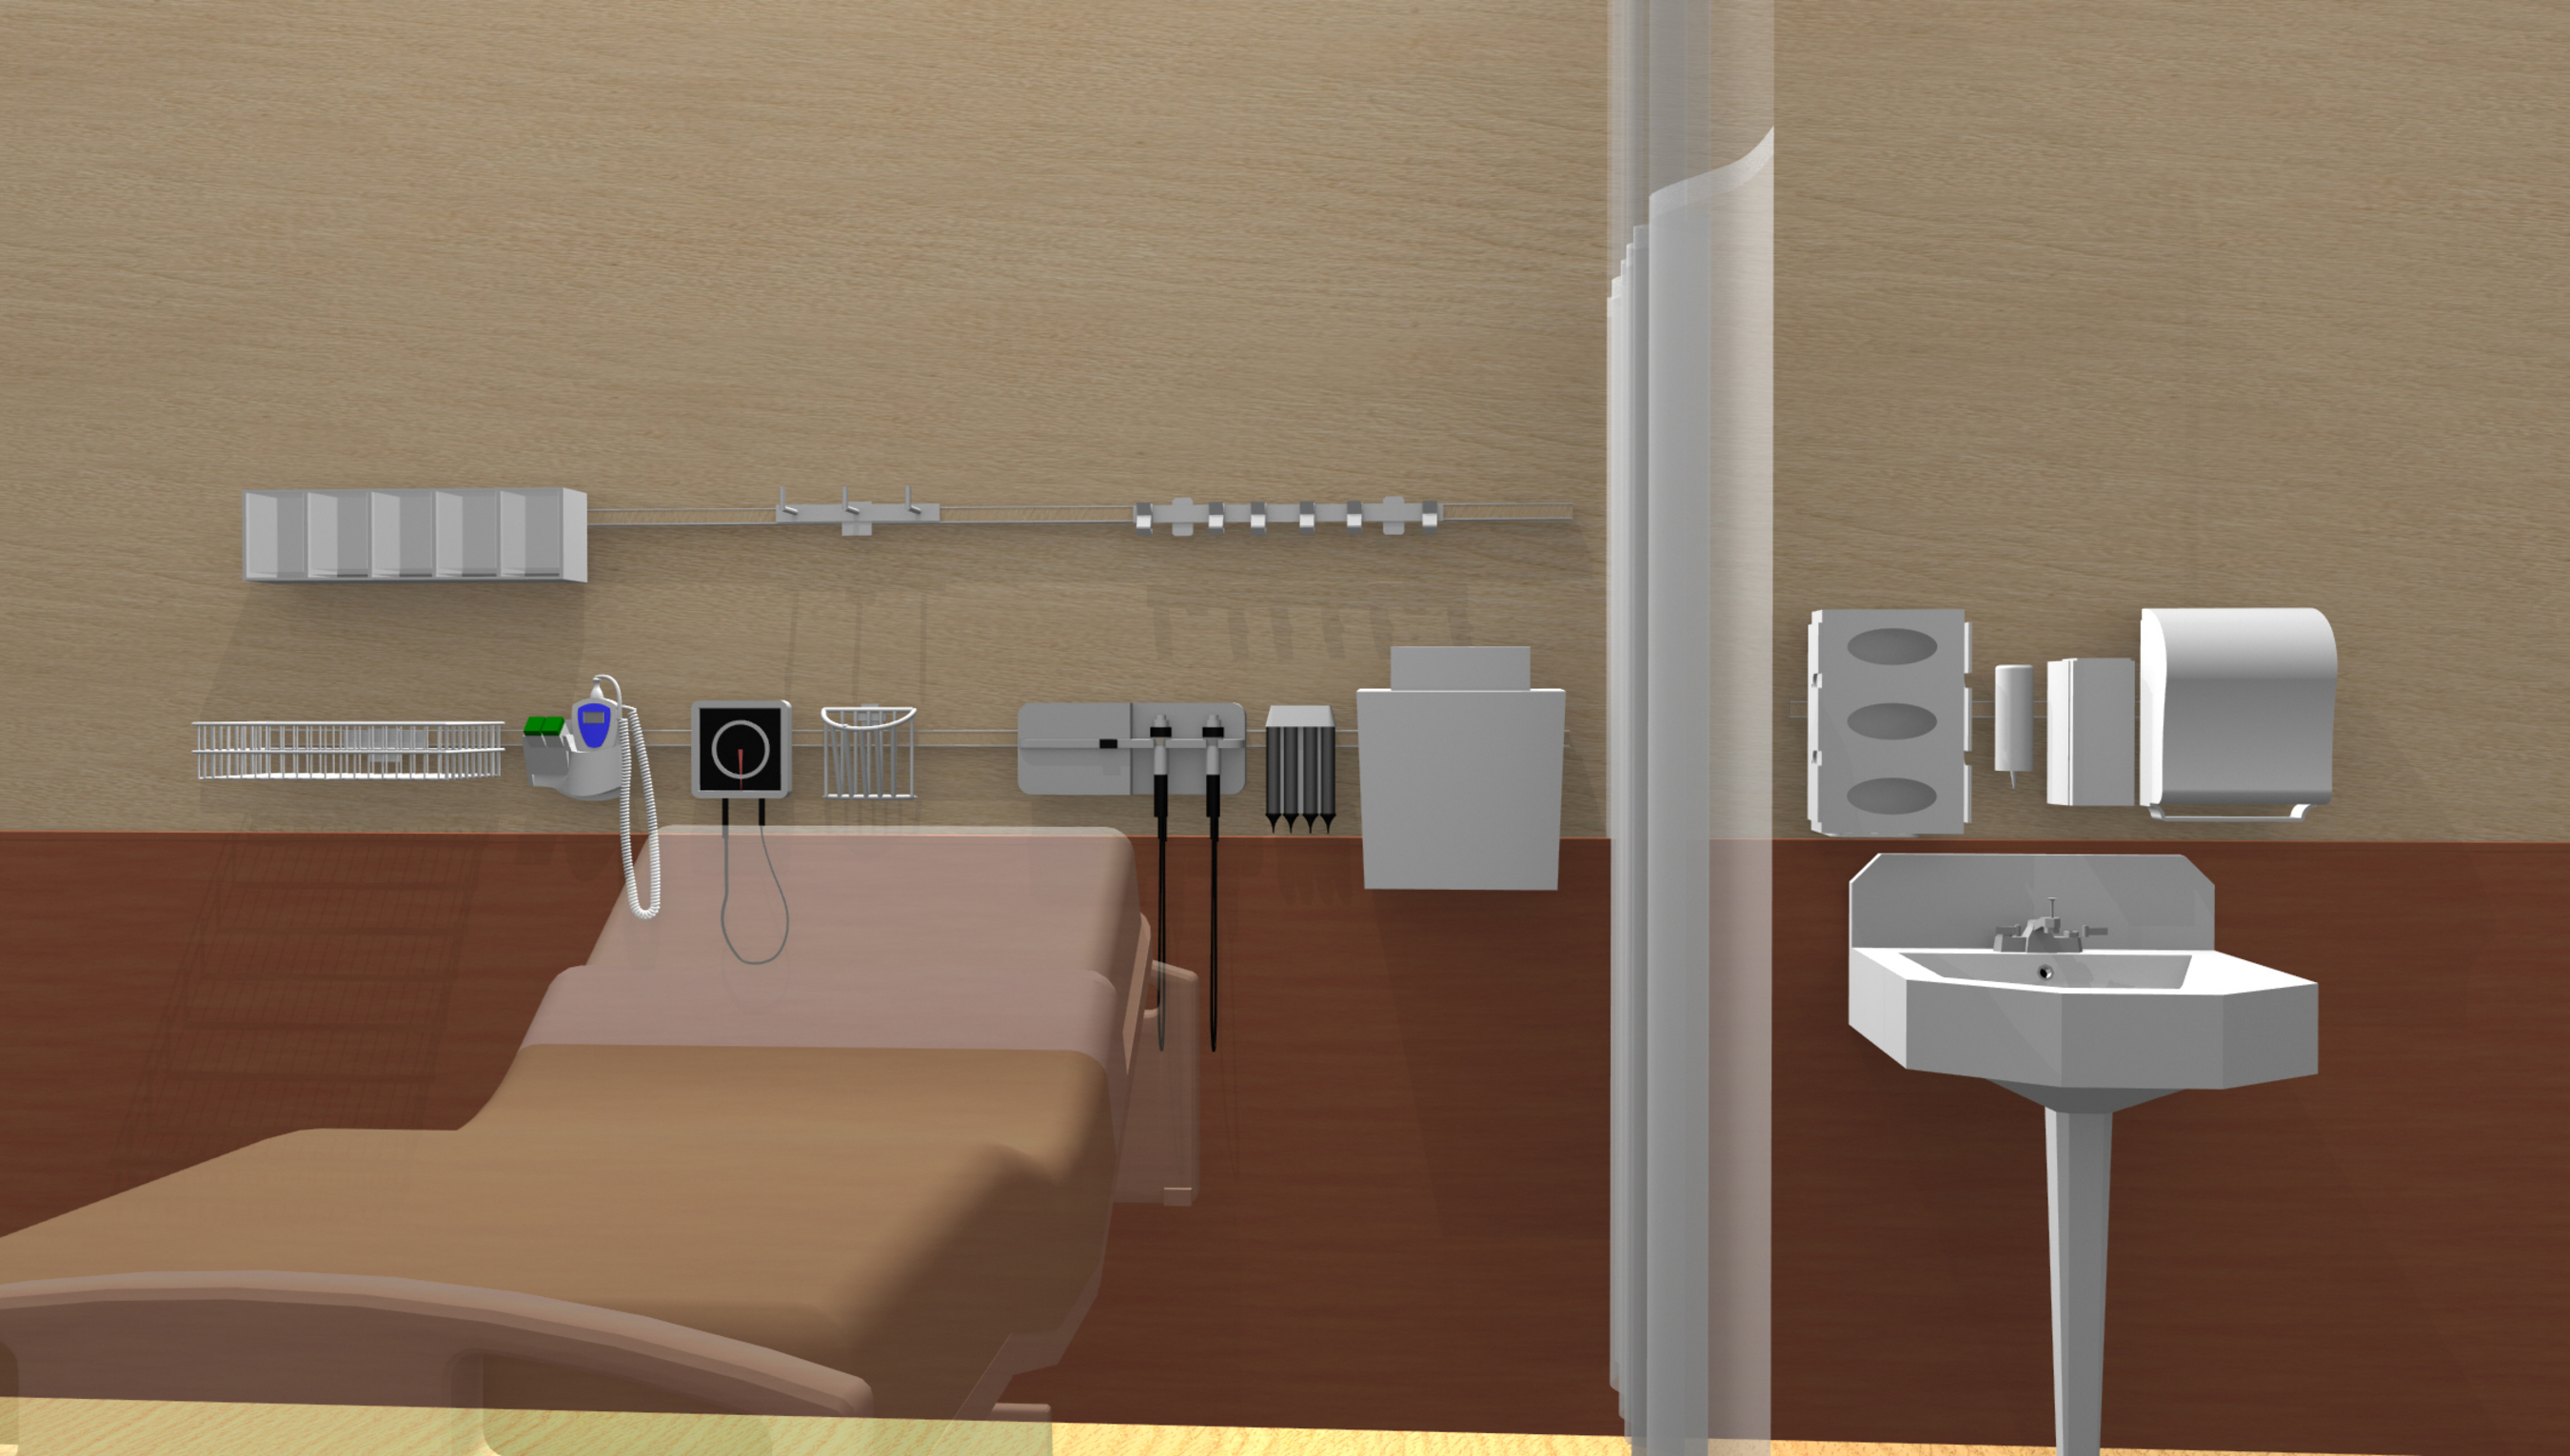 3D Rendering of "Fairfield" Style Evolution Rail in a Hospital
 (PRNewsFoto/Paladin Medical Products LLC)